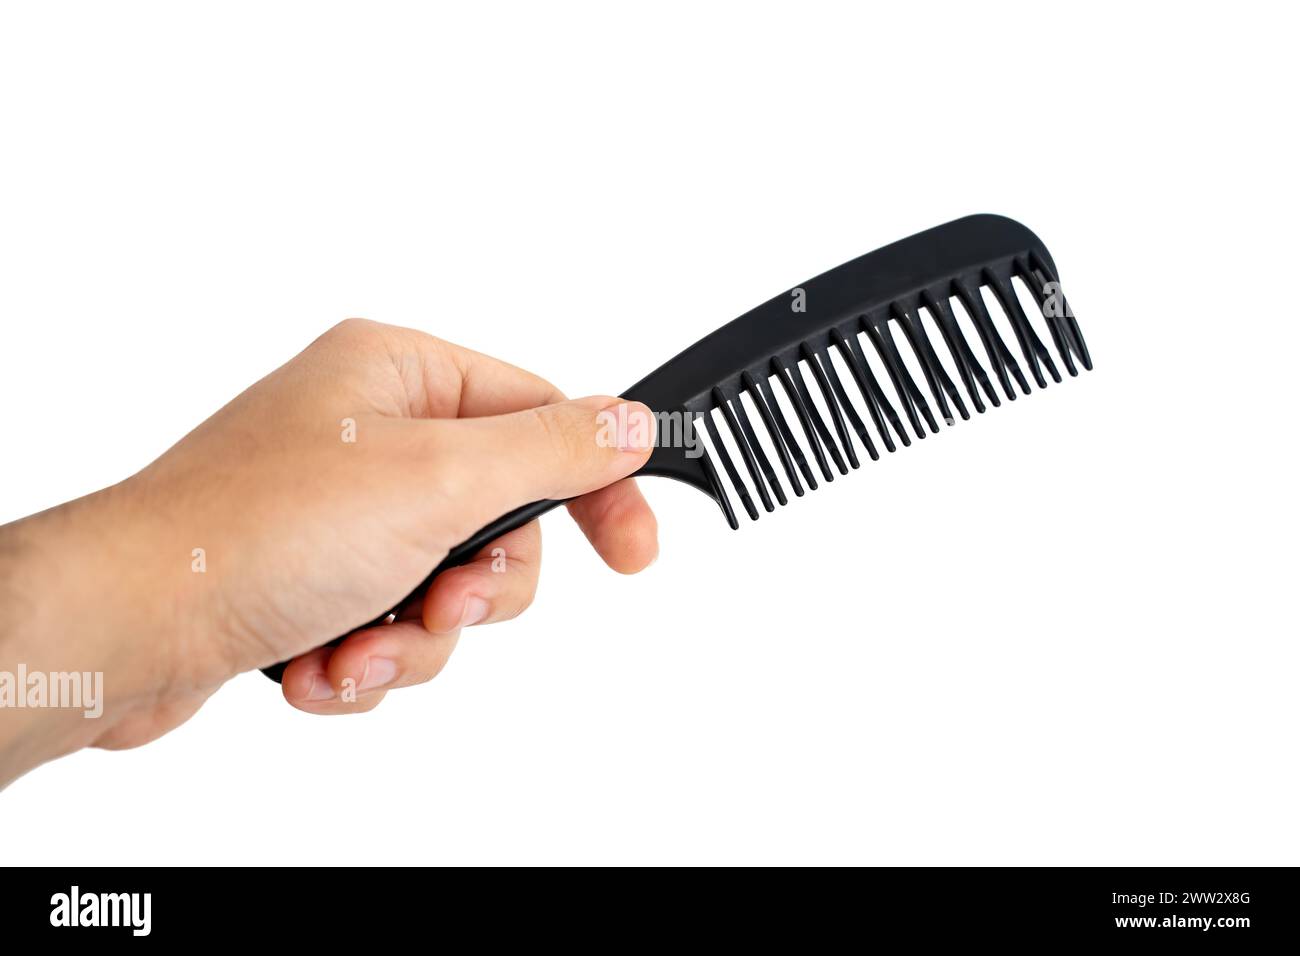 Male Hand Holding A Black Hair Comb, Isolated On White Background Stock Photo